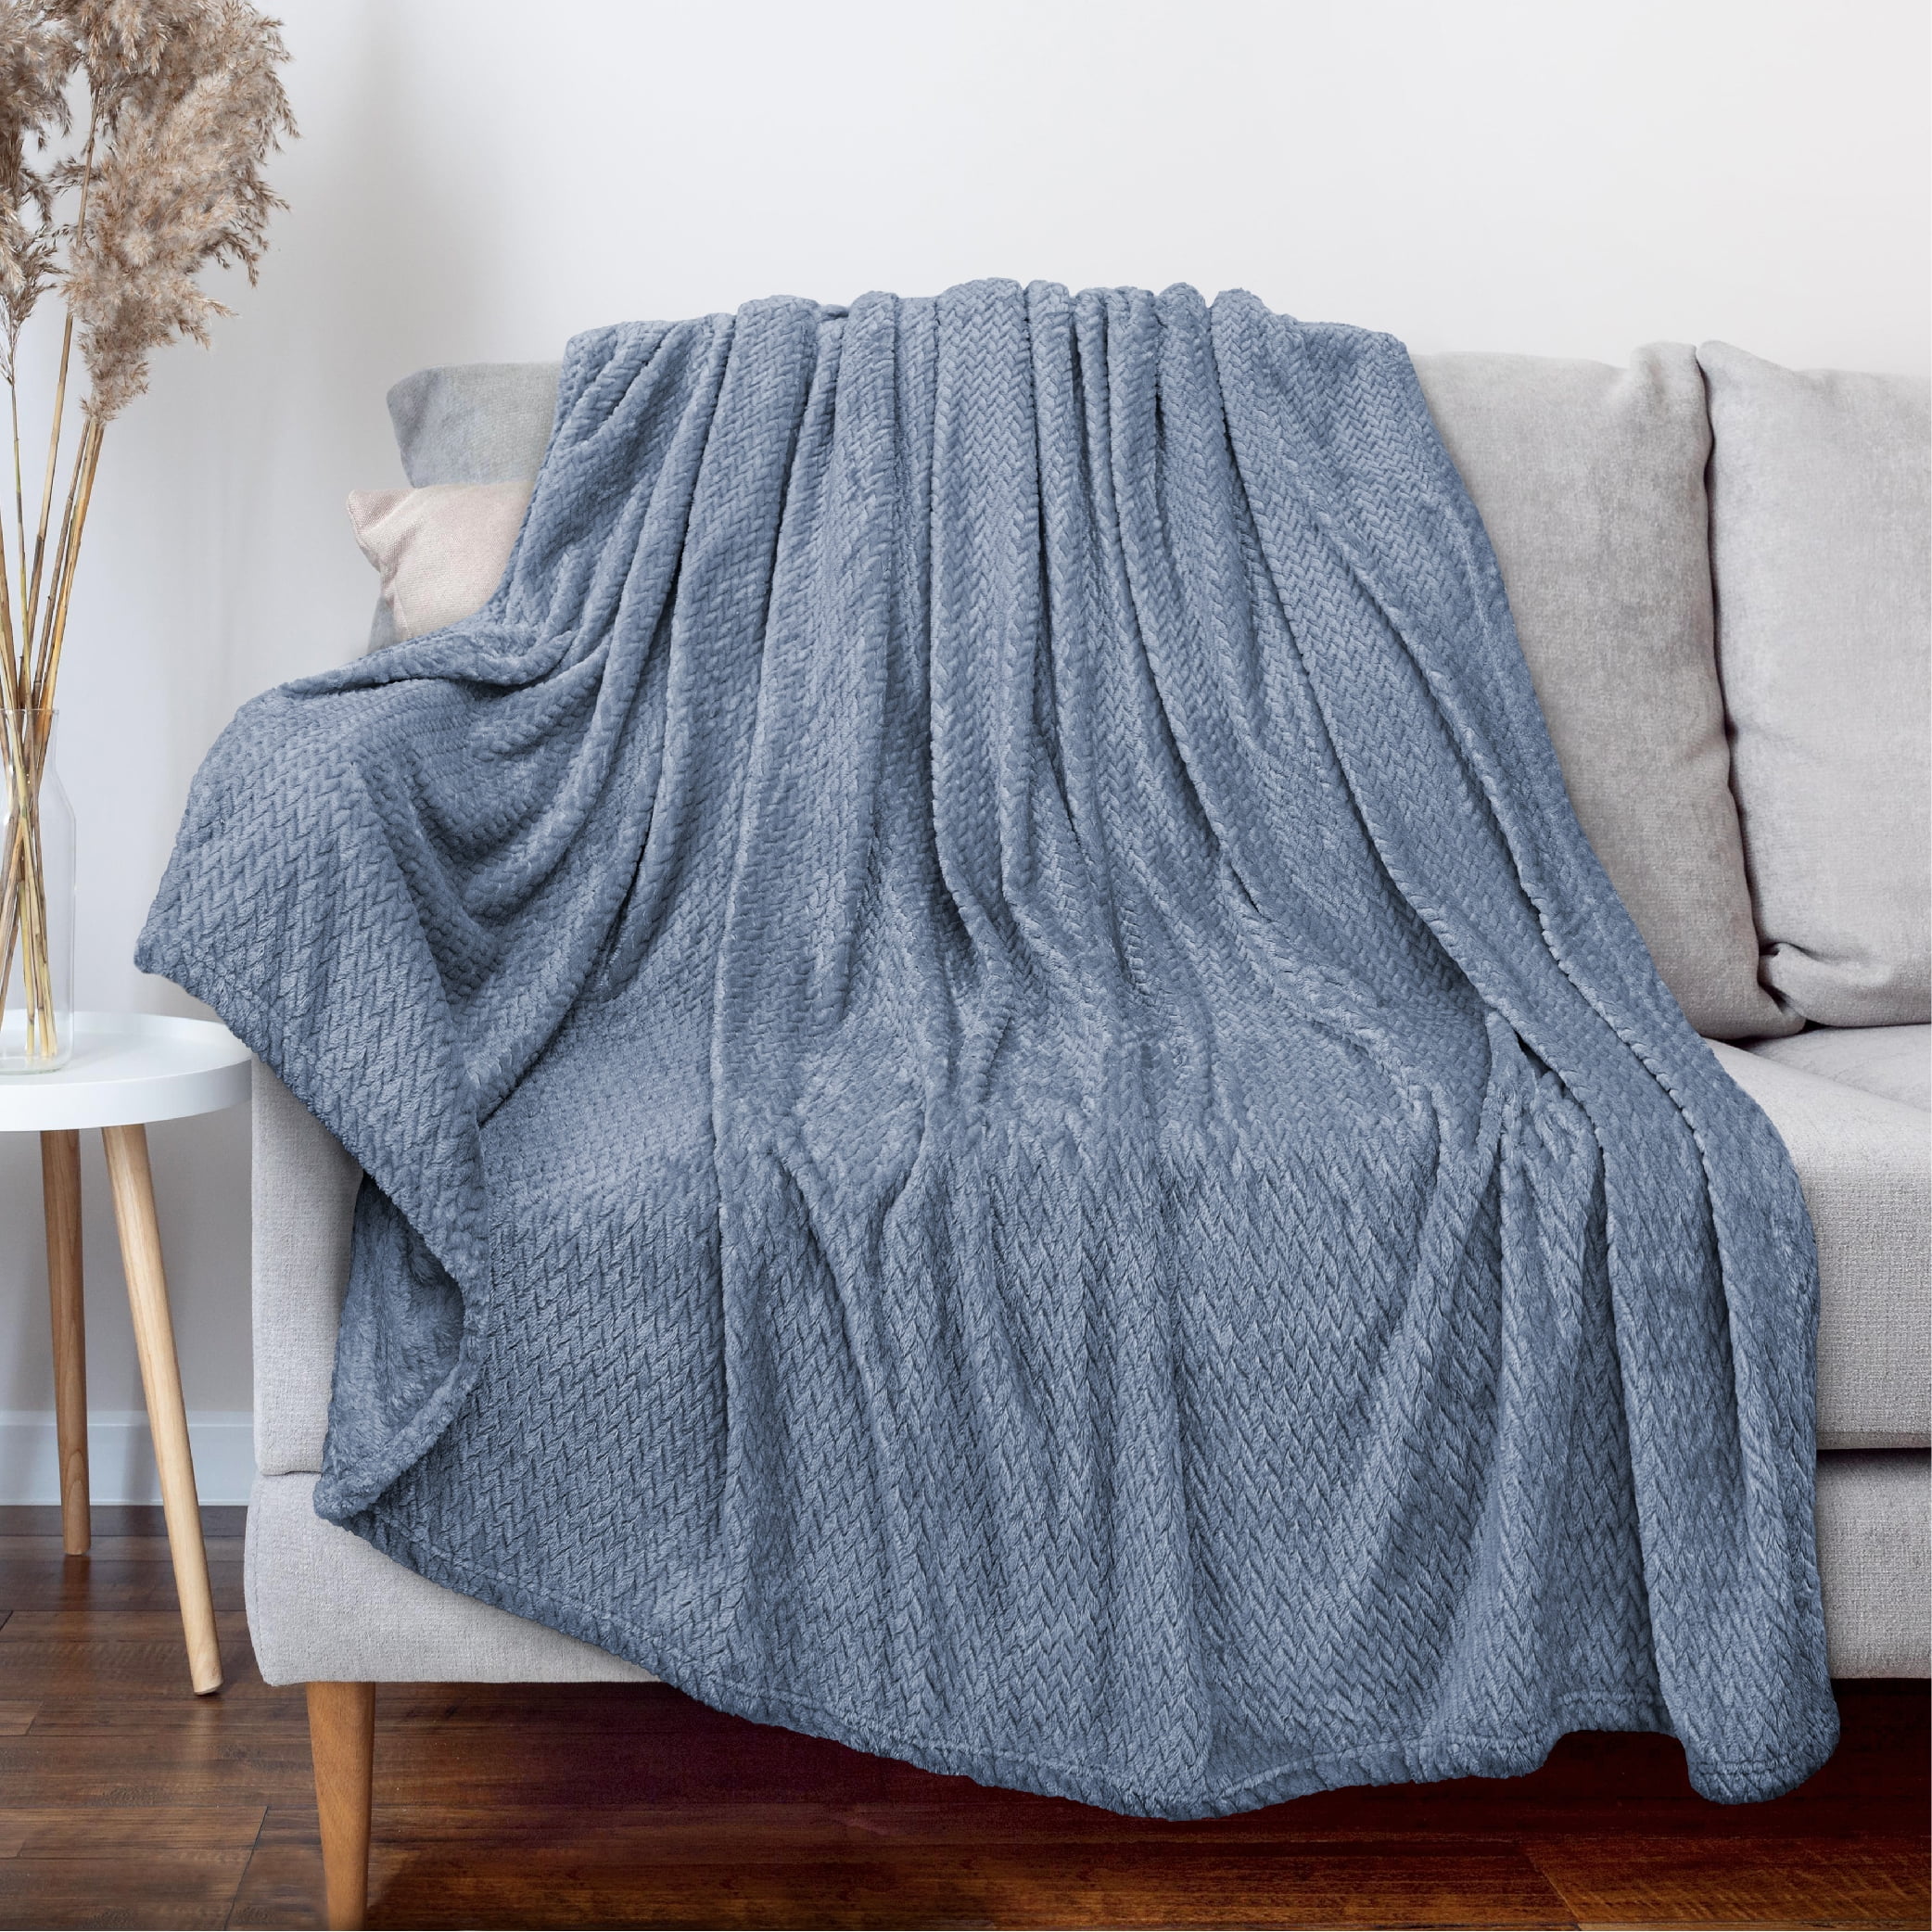 PAVILIA Soft Fleece Dusty Blue Throw Blanket for Couch